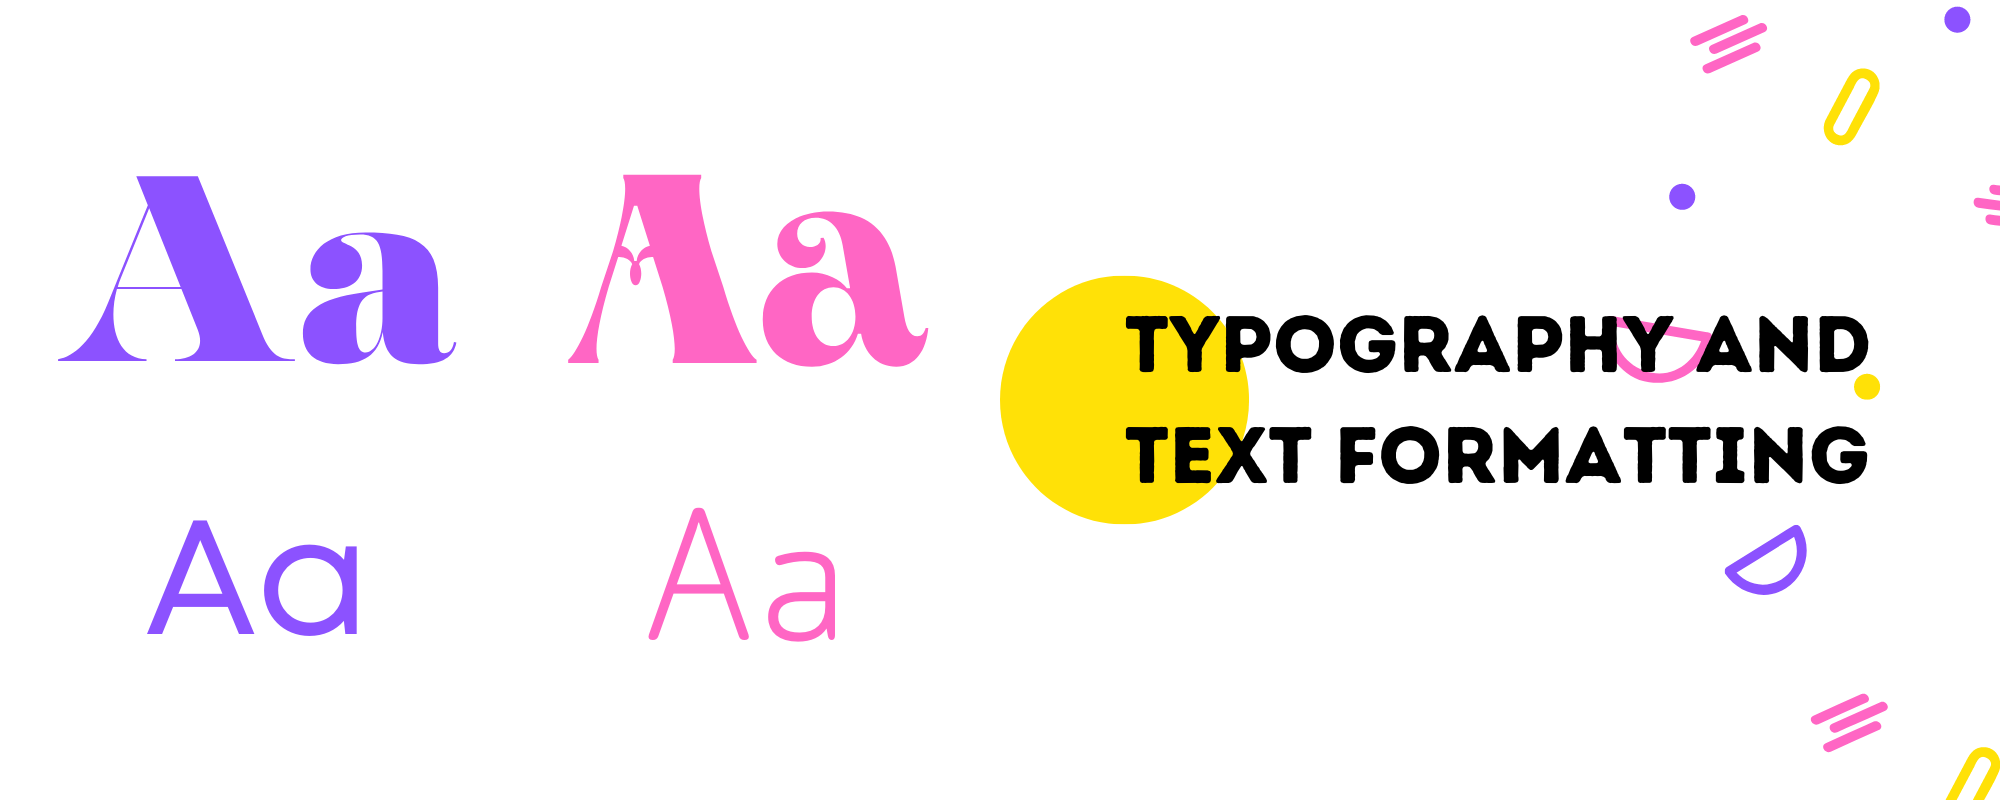 Font color and sizes